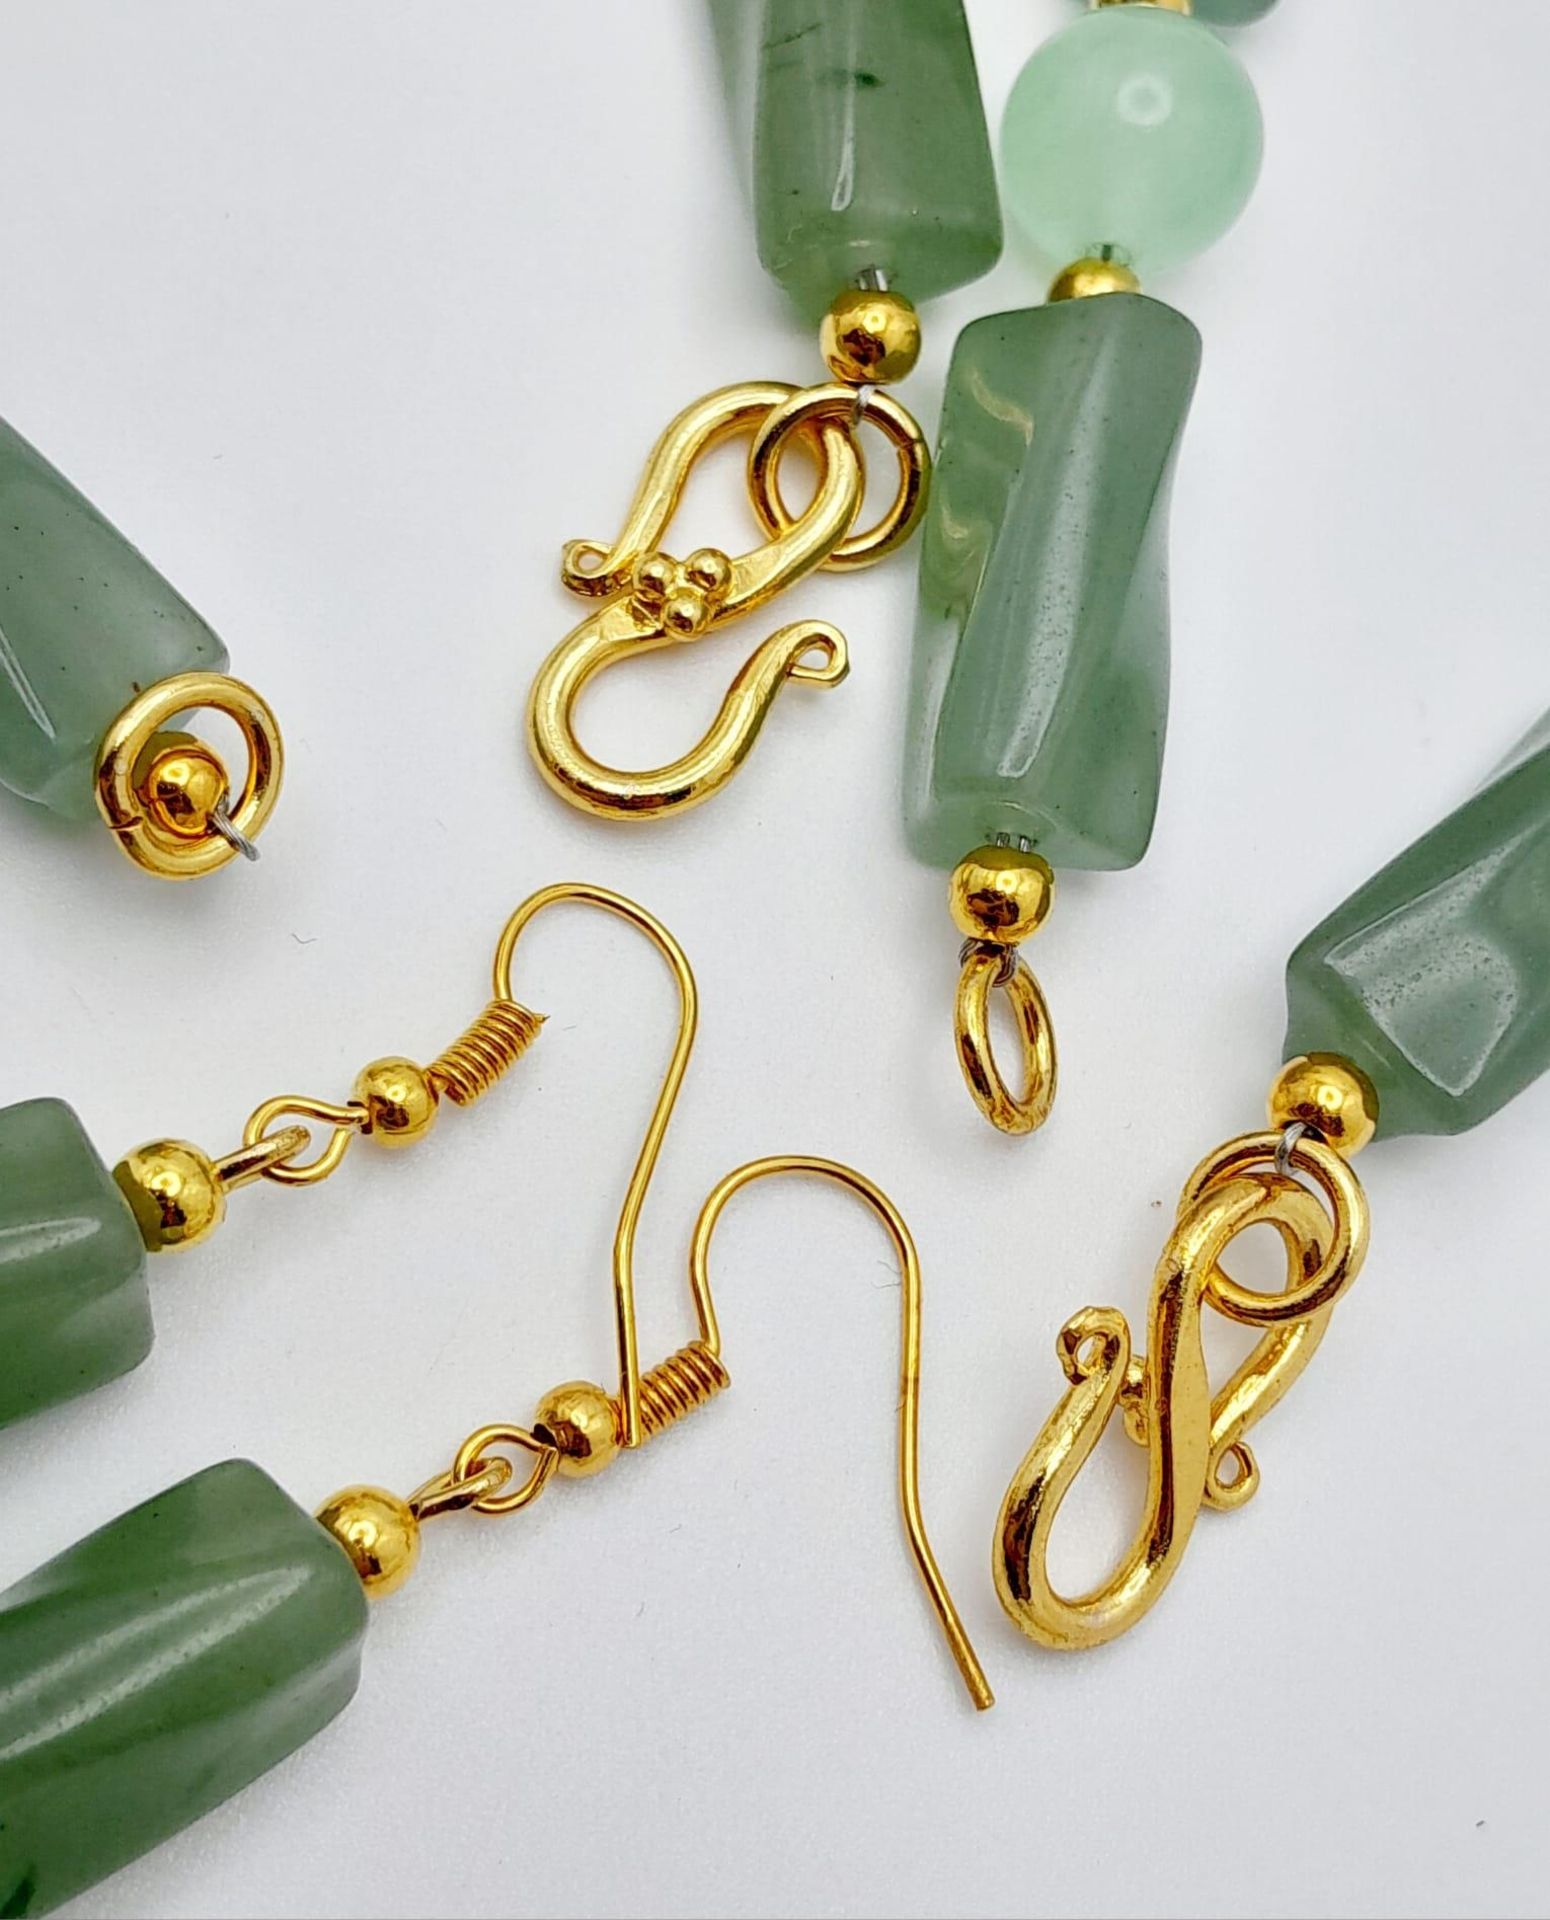 A high-quality light green, semi-translucent, jade necklace, bracelet and earrings set. Necklace - Image 5 of 5